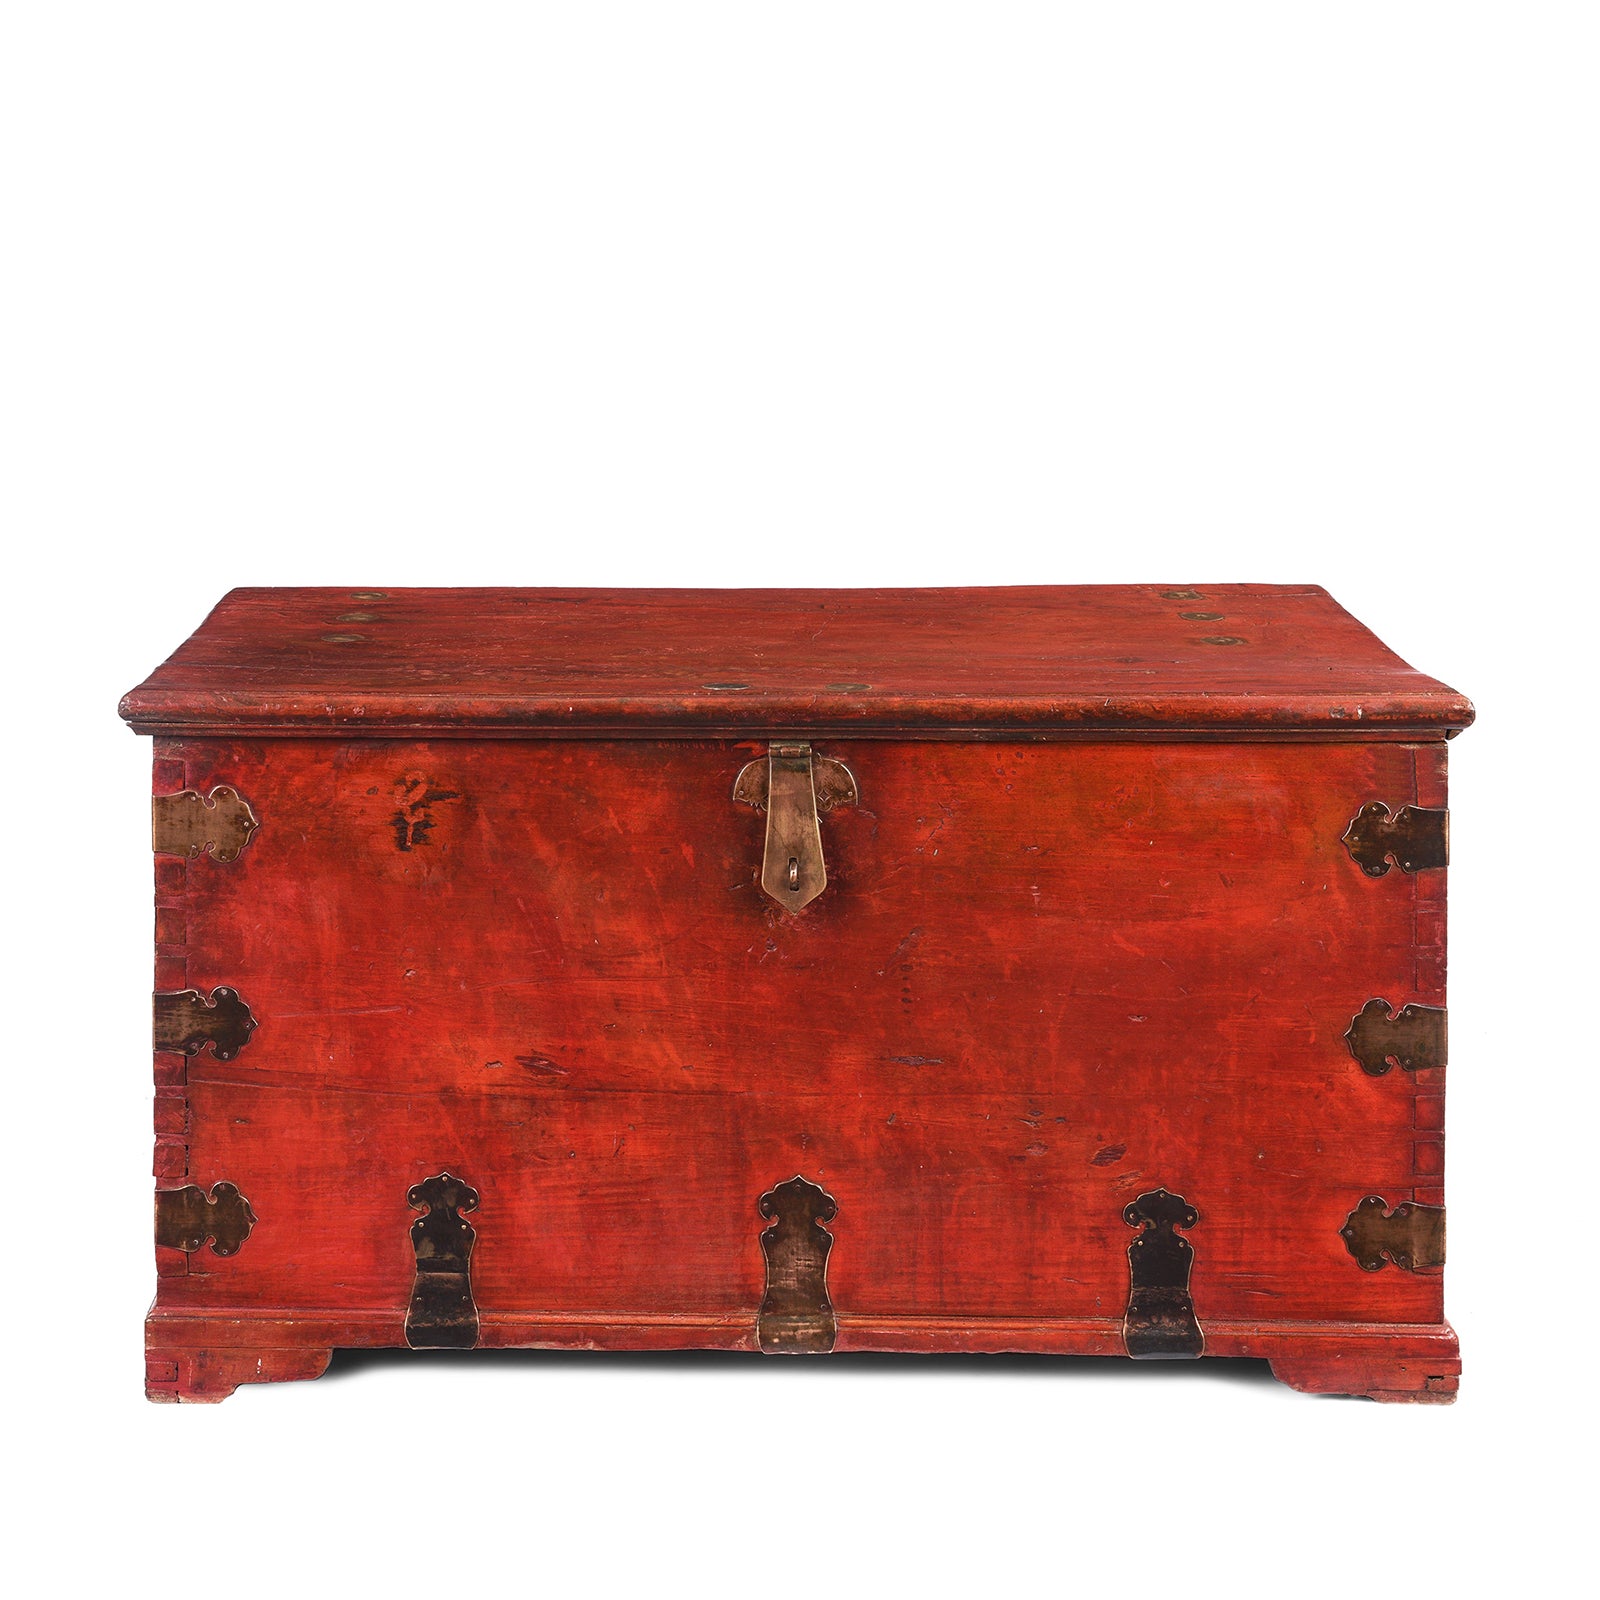 Antique Red Lacquer Camphor Chinese Chest From India - 18th Century | Indigo Antiques